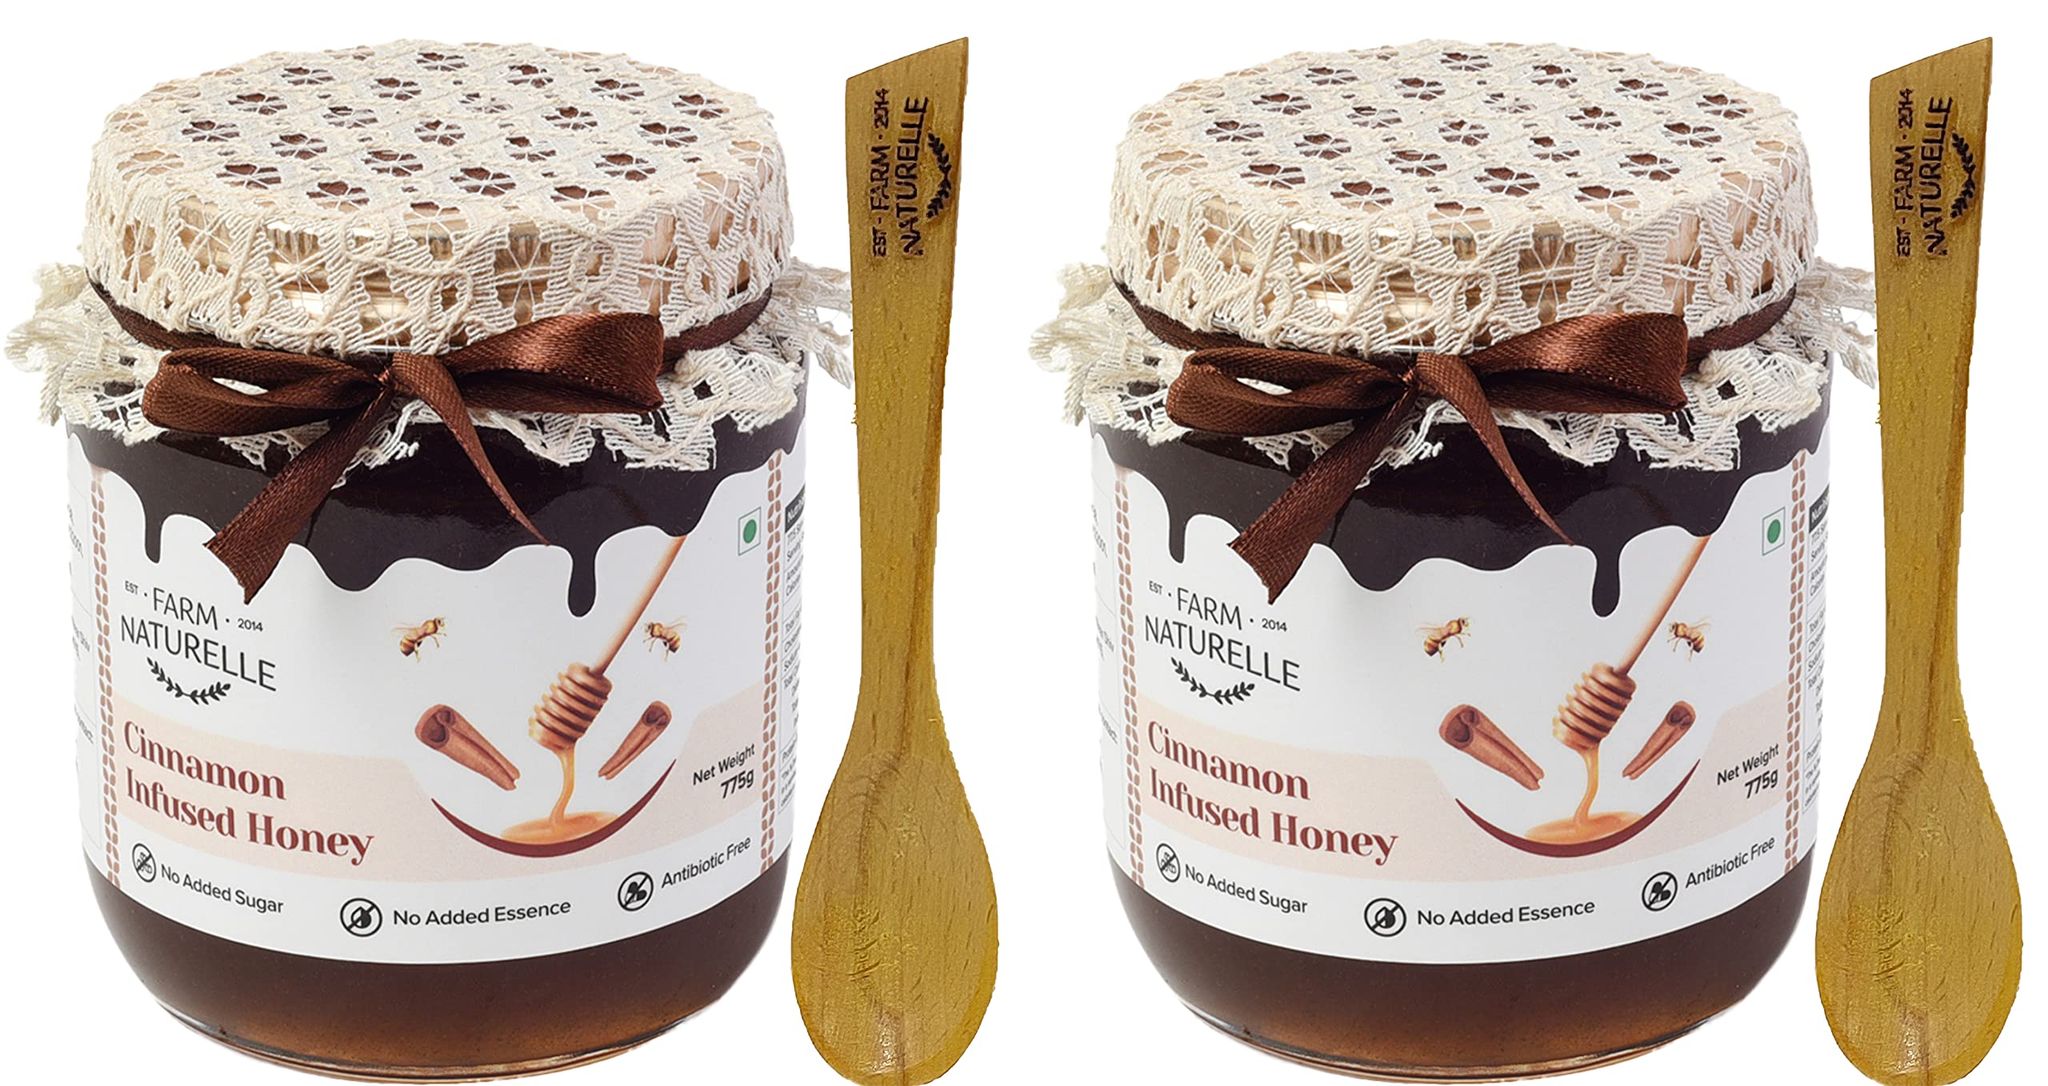 Farm Naturelle-Cinnamon Flower Wild Forest Honey | 775gm X 2 | and a Wooden Spoon100% Pure & Natural Ingredients Made Delicious Honey | No Artificial Color | No Added Sugar | Lab Tested Cinnamon Honey In Glass Bottle.